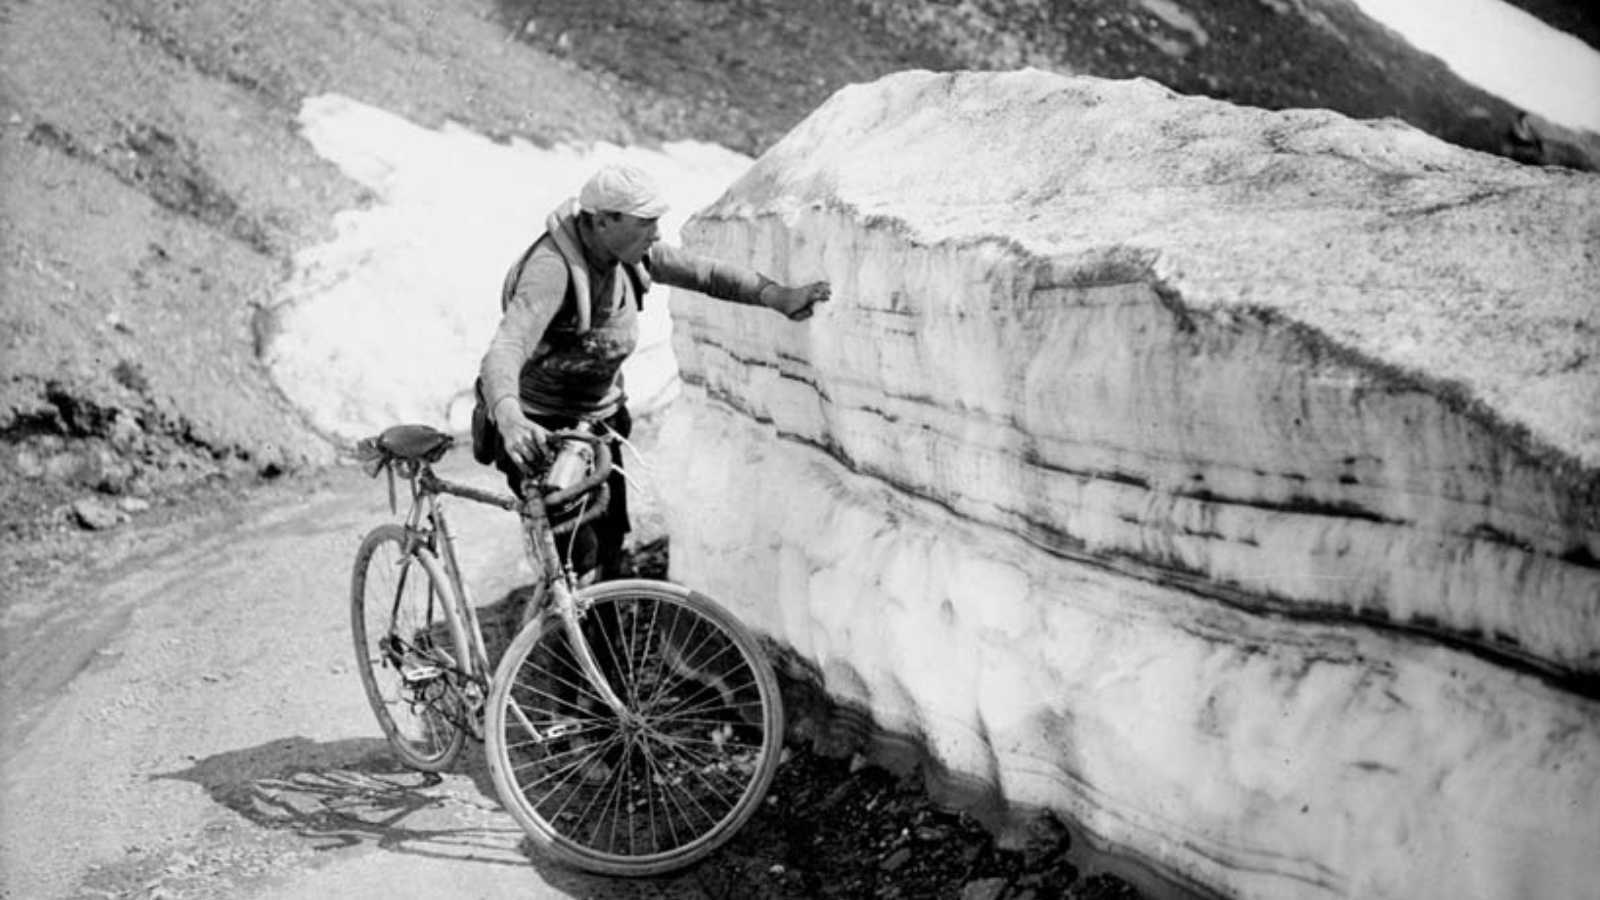 Belgian cyclist Hector Heusghem is refreshing himself with snow at the Tiur de France in 1923